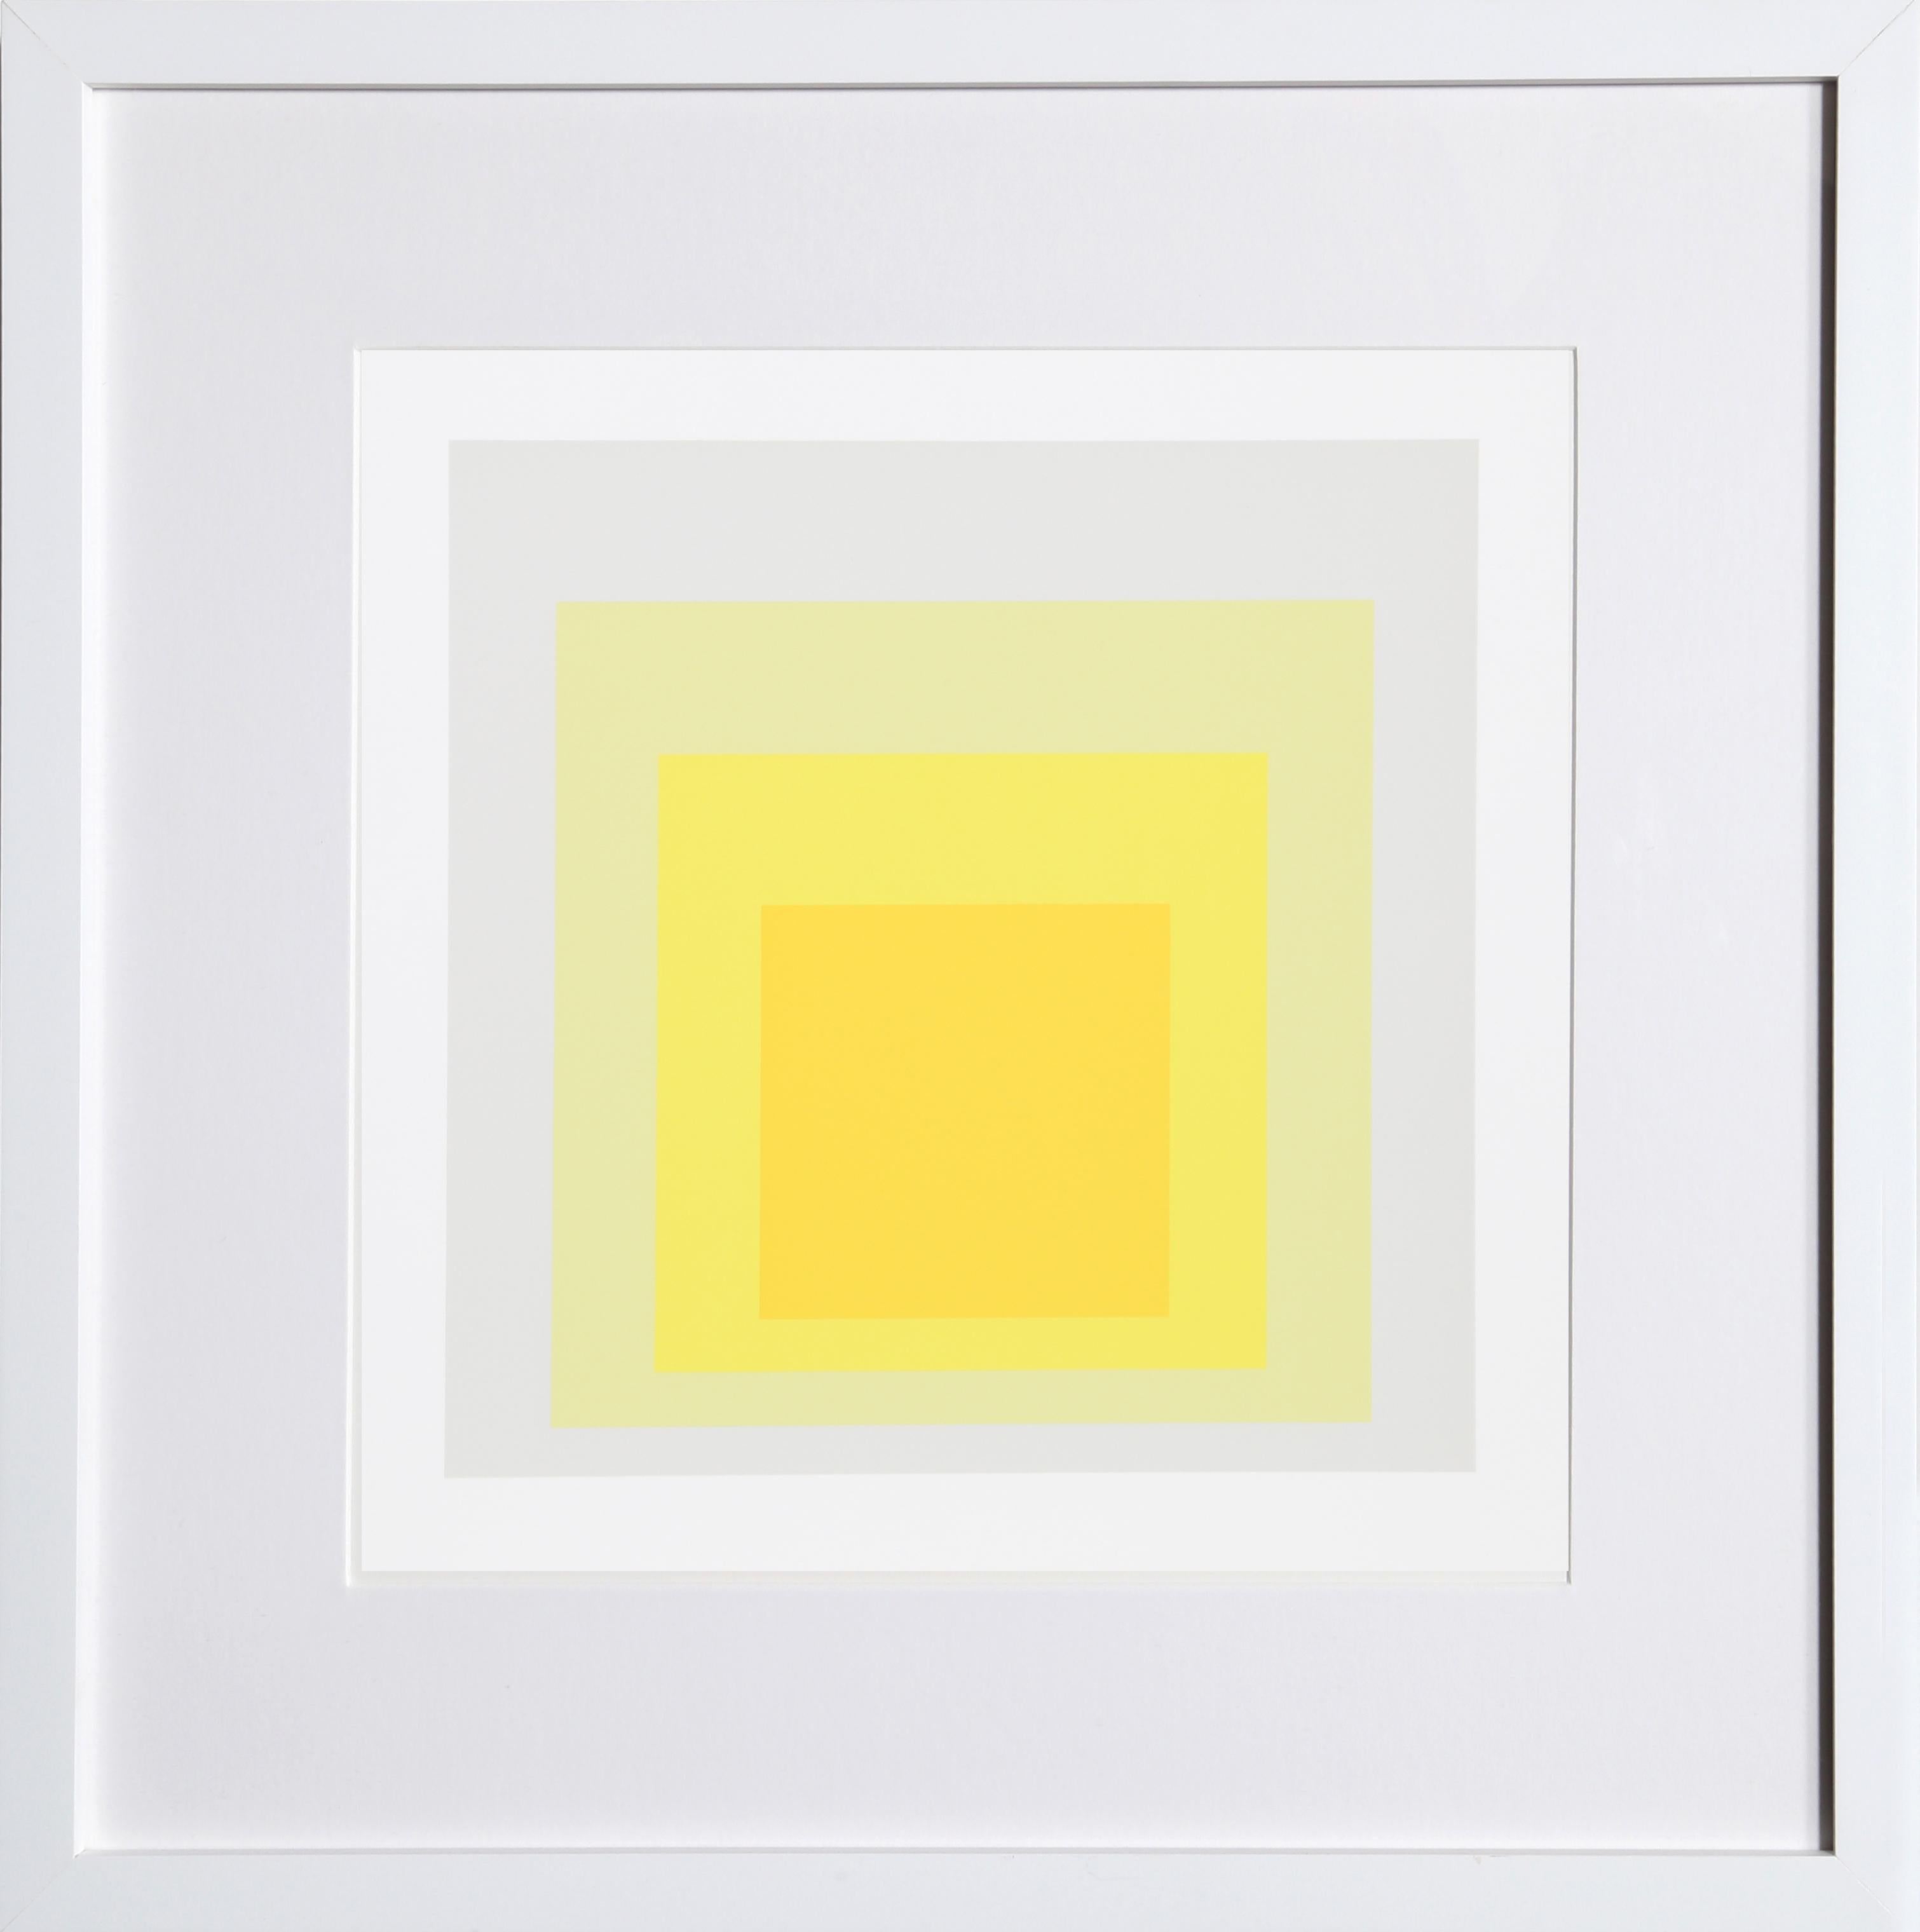 "Homage to the Square - Portfolio 2, Folder 8, Image 2" from the portfolio “Formulation: Articulation” created by Josef Albers in 1972. This monumental series consists of 127 original silkscreens that are a definitive survey of the artist's most